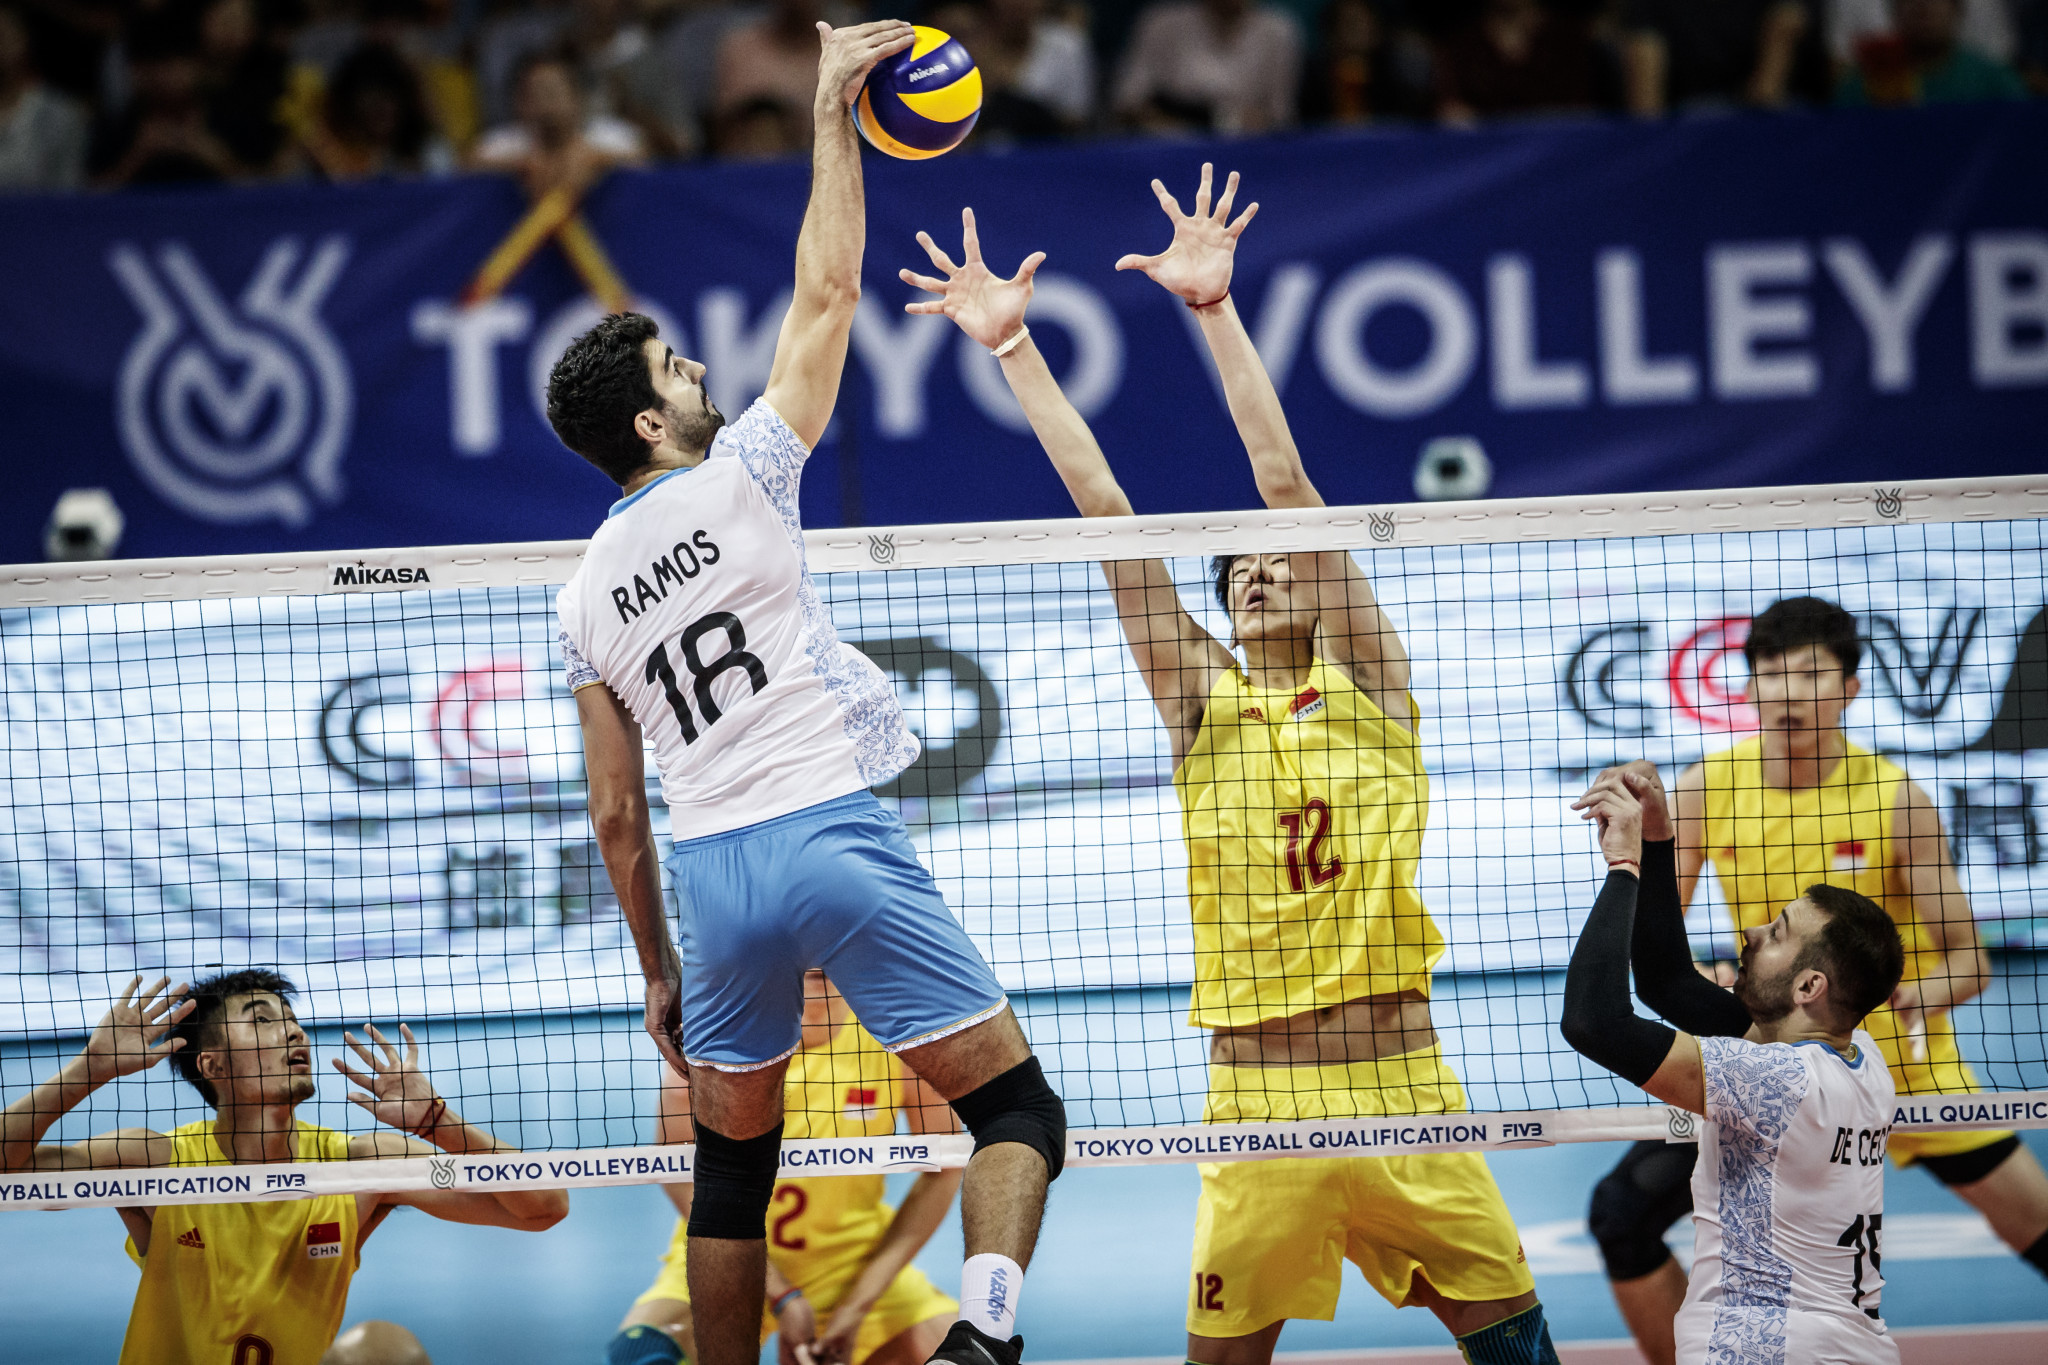 Argentina edged a five-set thriller against China in the FIVB Men's International Olympic Qualification Tournament to secure their place at Tokyo 2020 ©FIVB